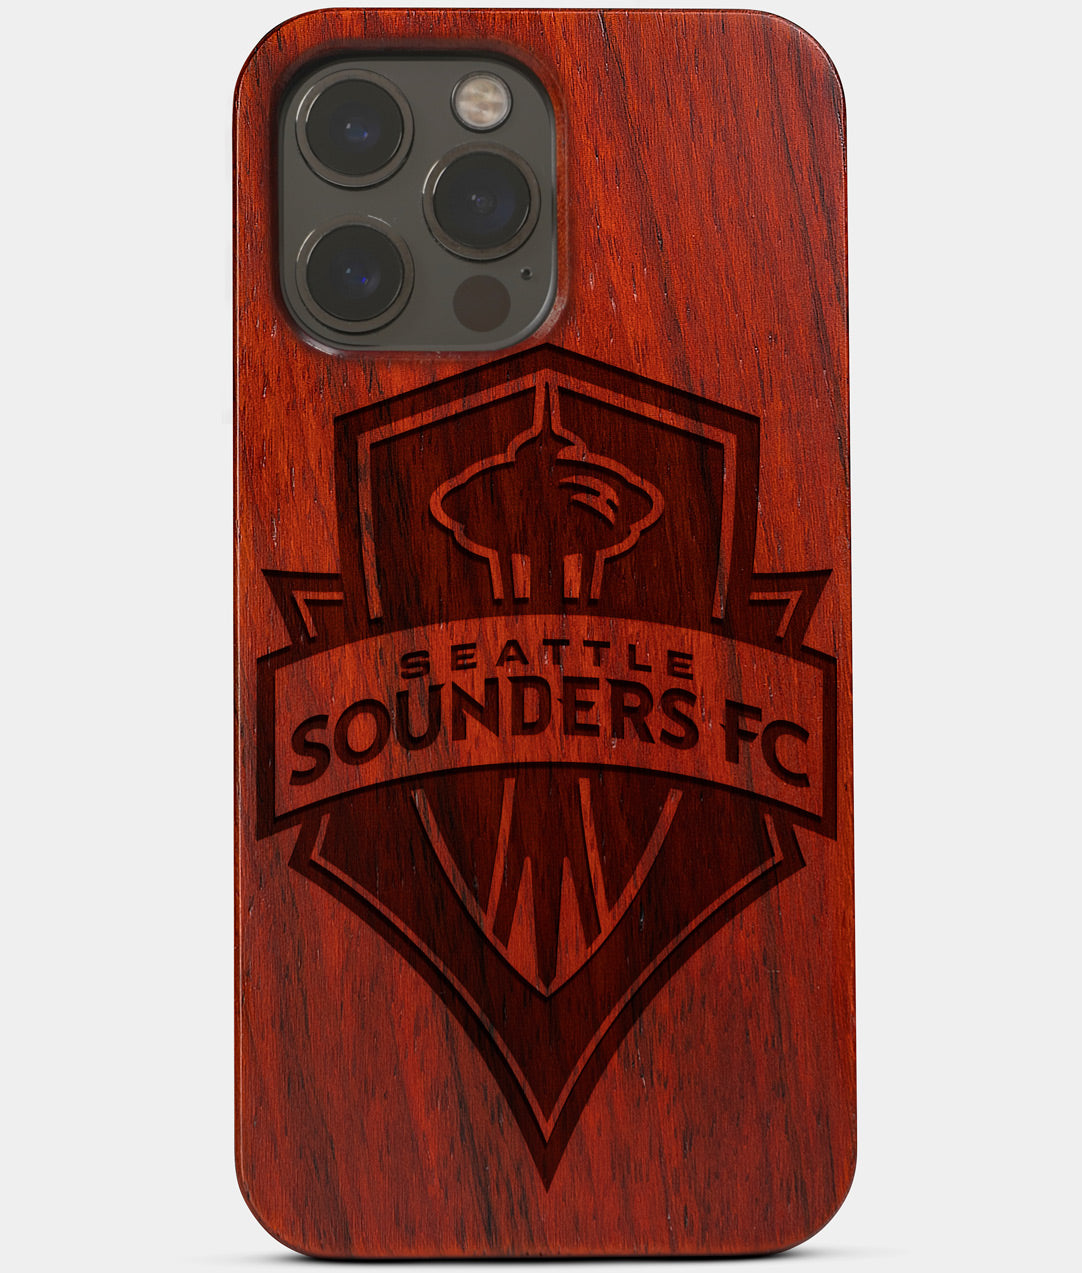 Carved Wood Seattle Sounders FC iPhone 13 Pro Case | Custom Seattle Sounders FC Gift, Birthday Gift | Personalized Mahogany Wood Cover, Gifts For Him, Monogrammed Gift For Fan | by Engraved In Nature